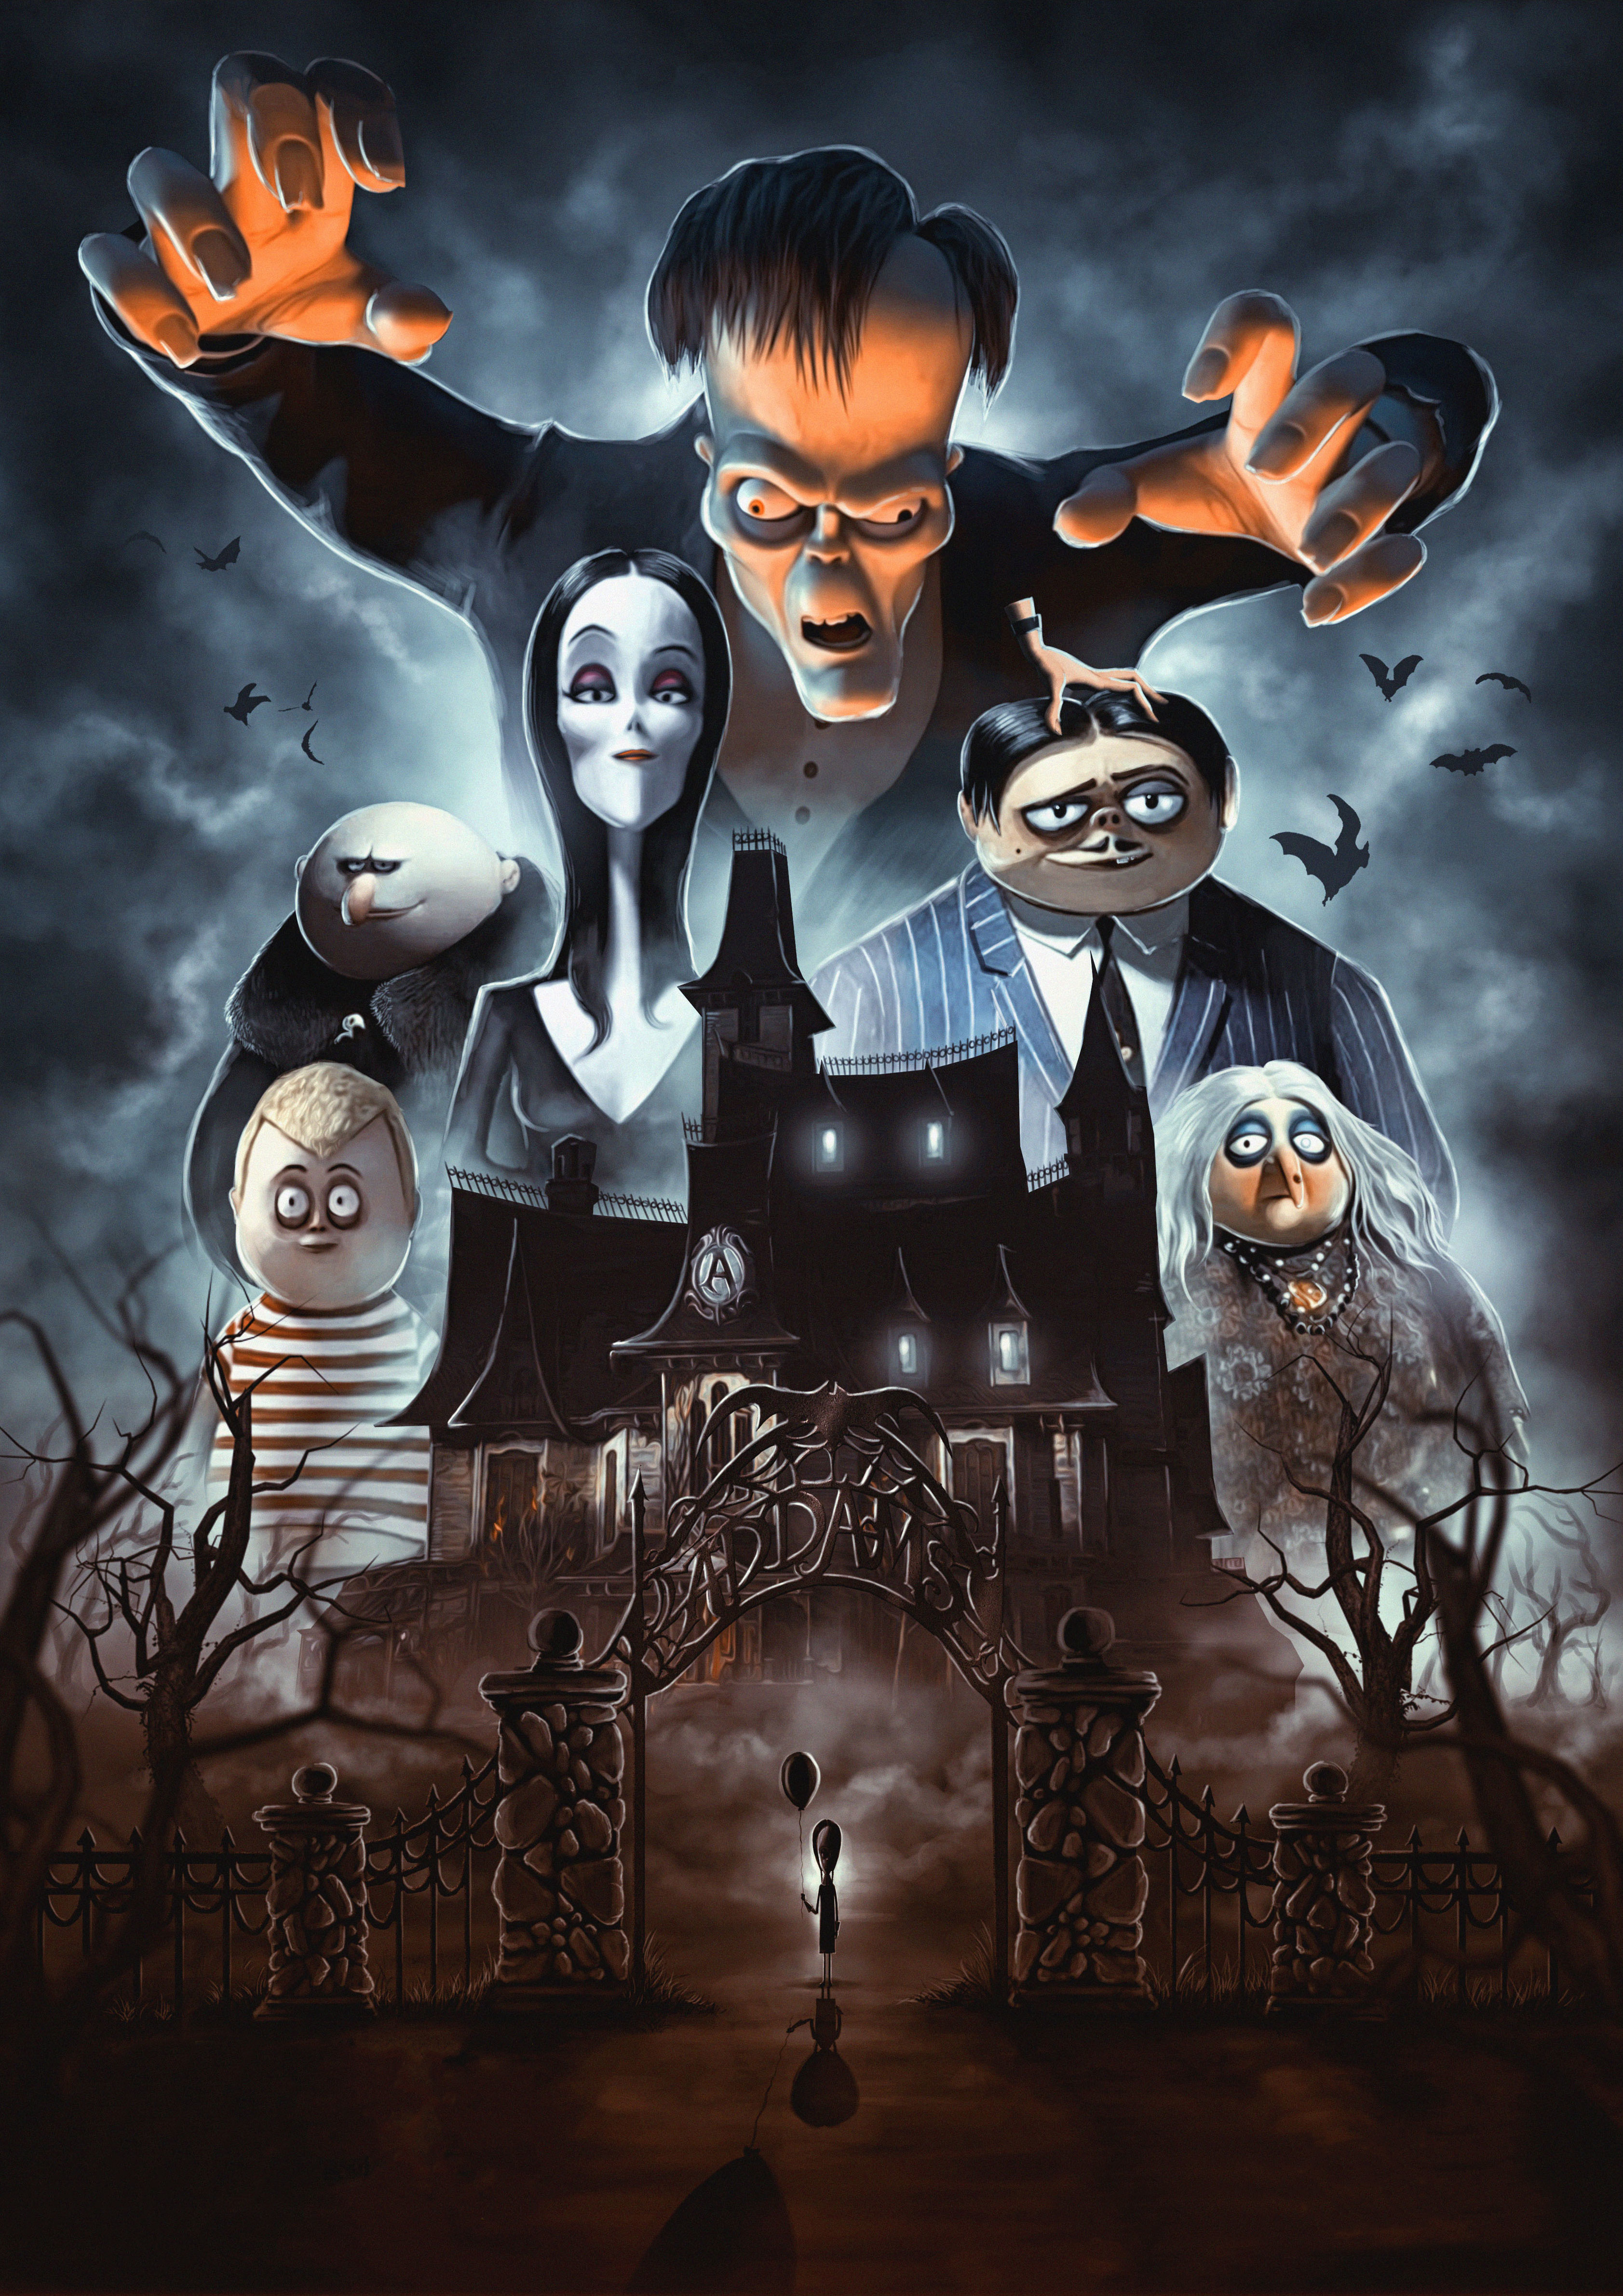 download family addams 1993